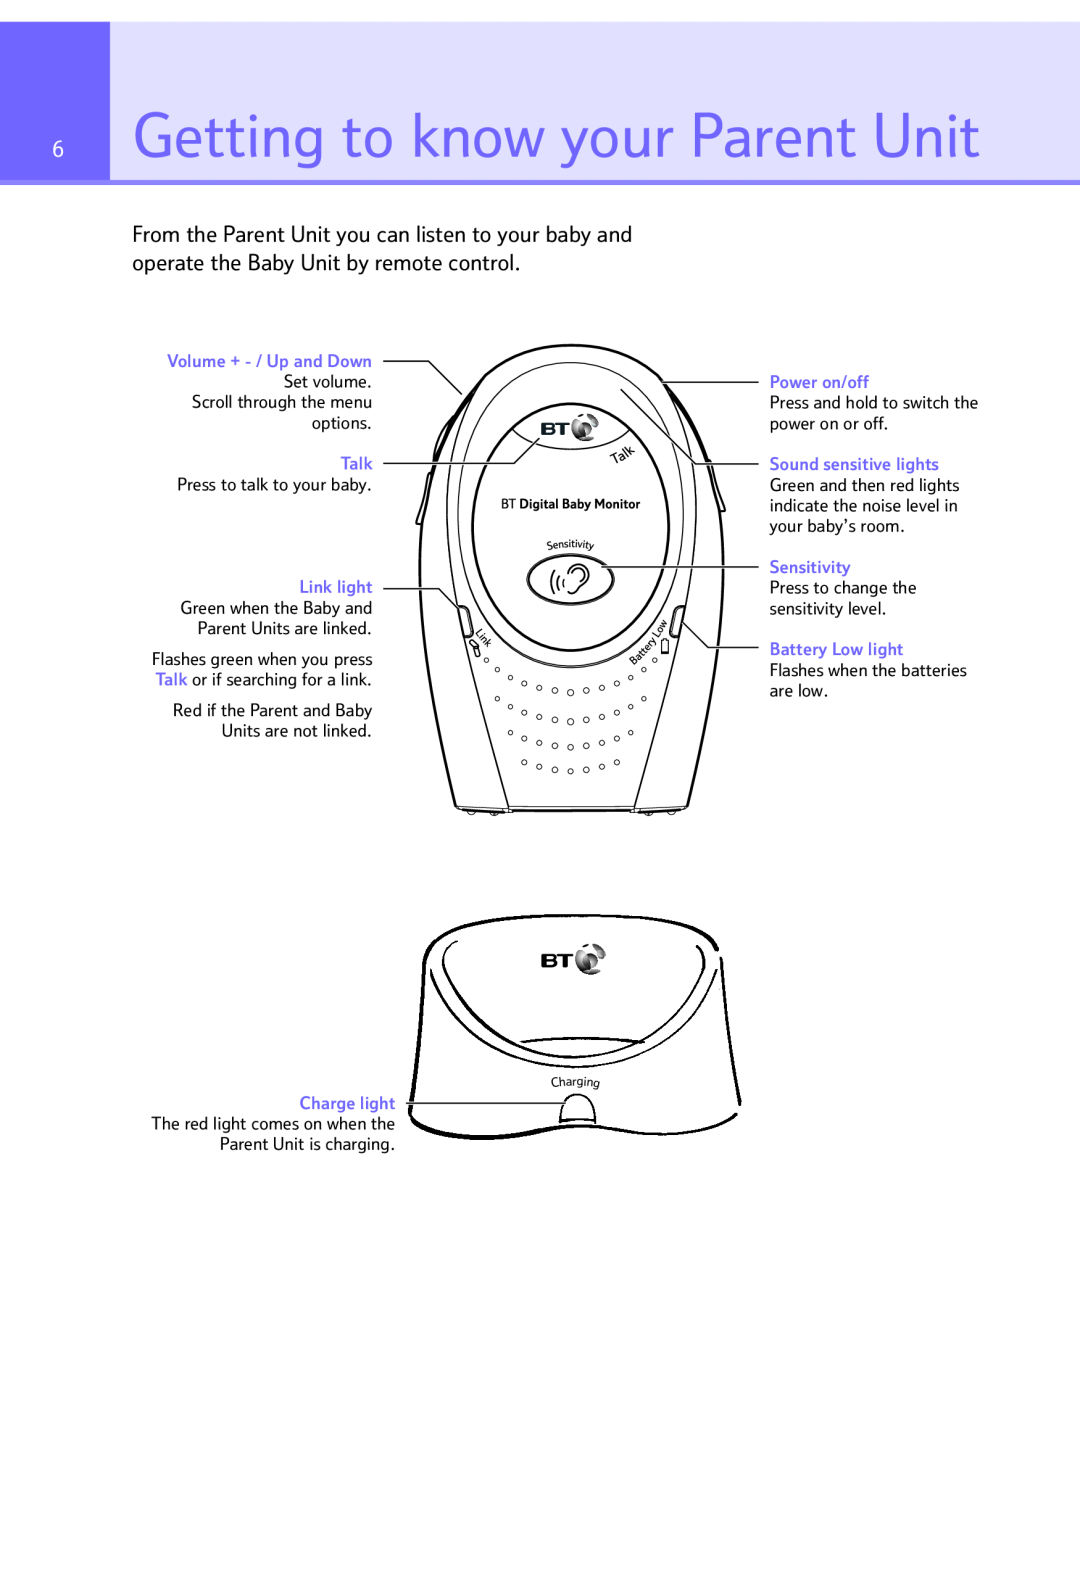 BT Digital Baby Monitor manual Getting to know your Parent Unit, Volume + - / Up and Down, Set volume, Talk, Link light 